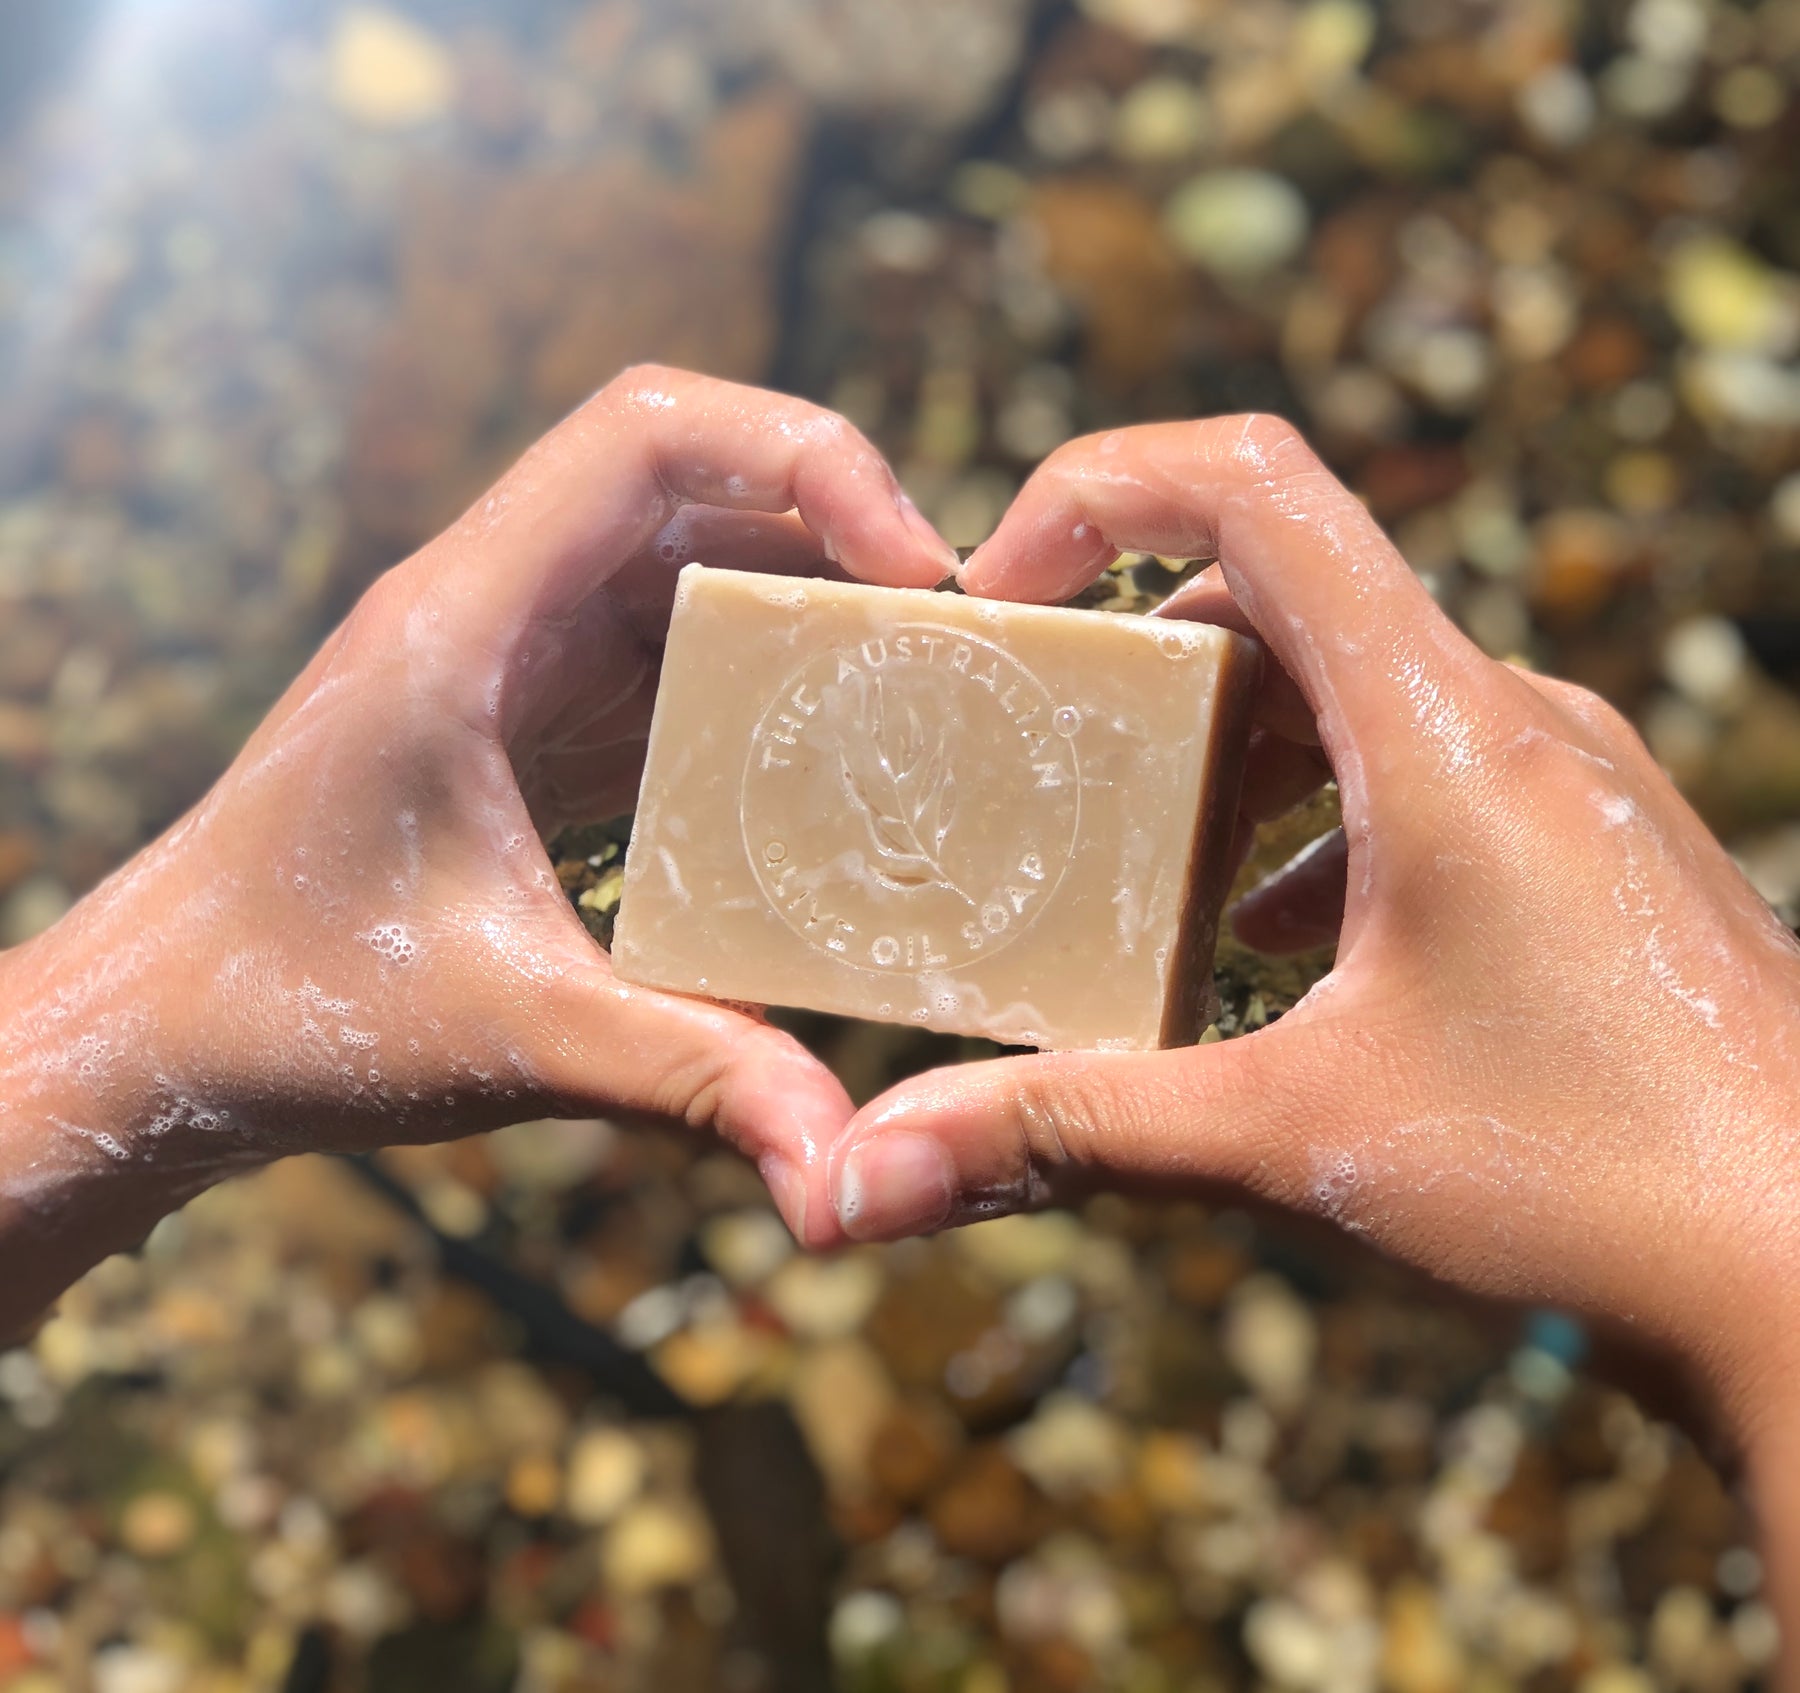 WILL NATURAL SOAP REMOVE GERMS FROM MY HANDS?